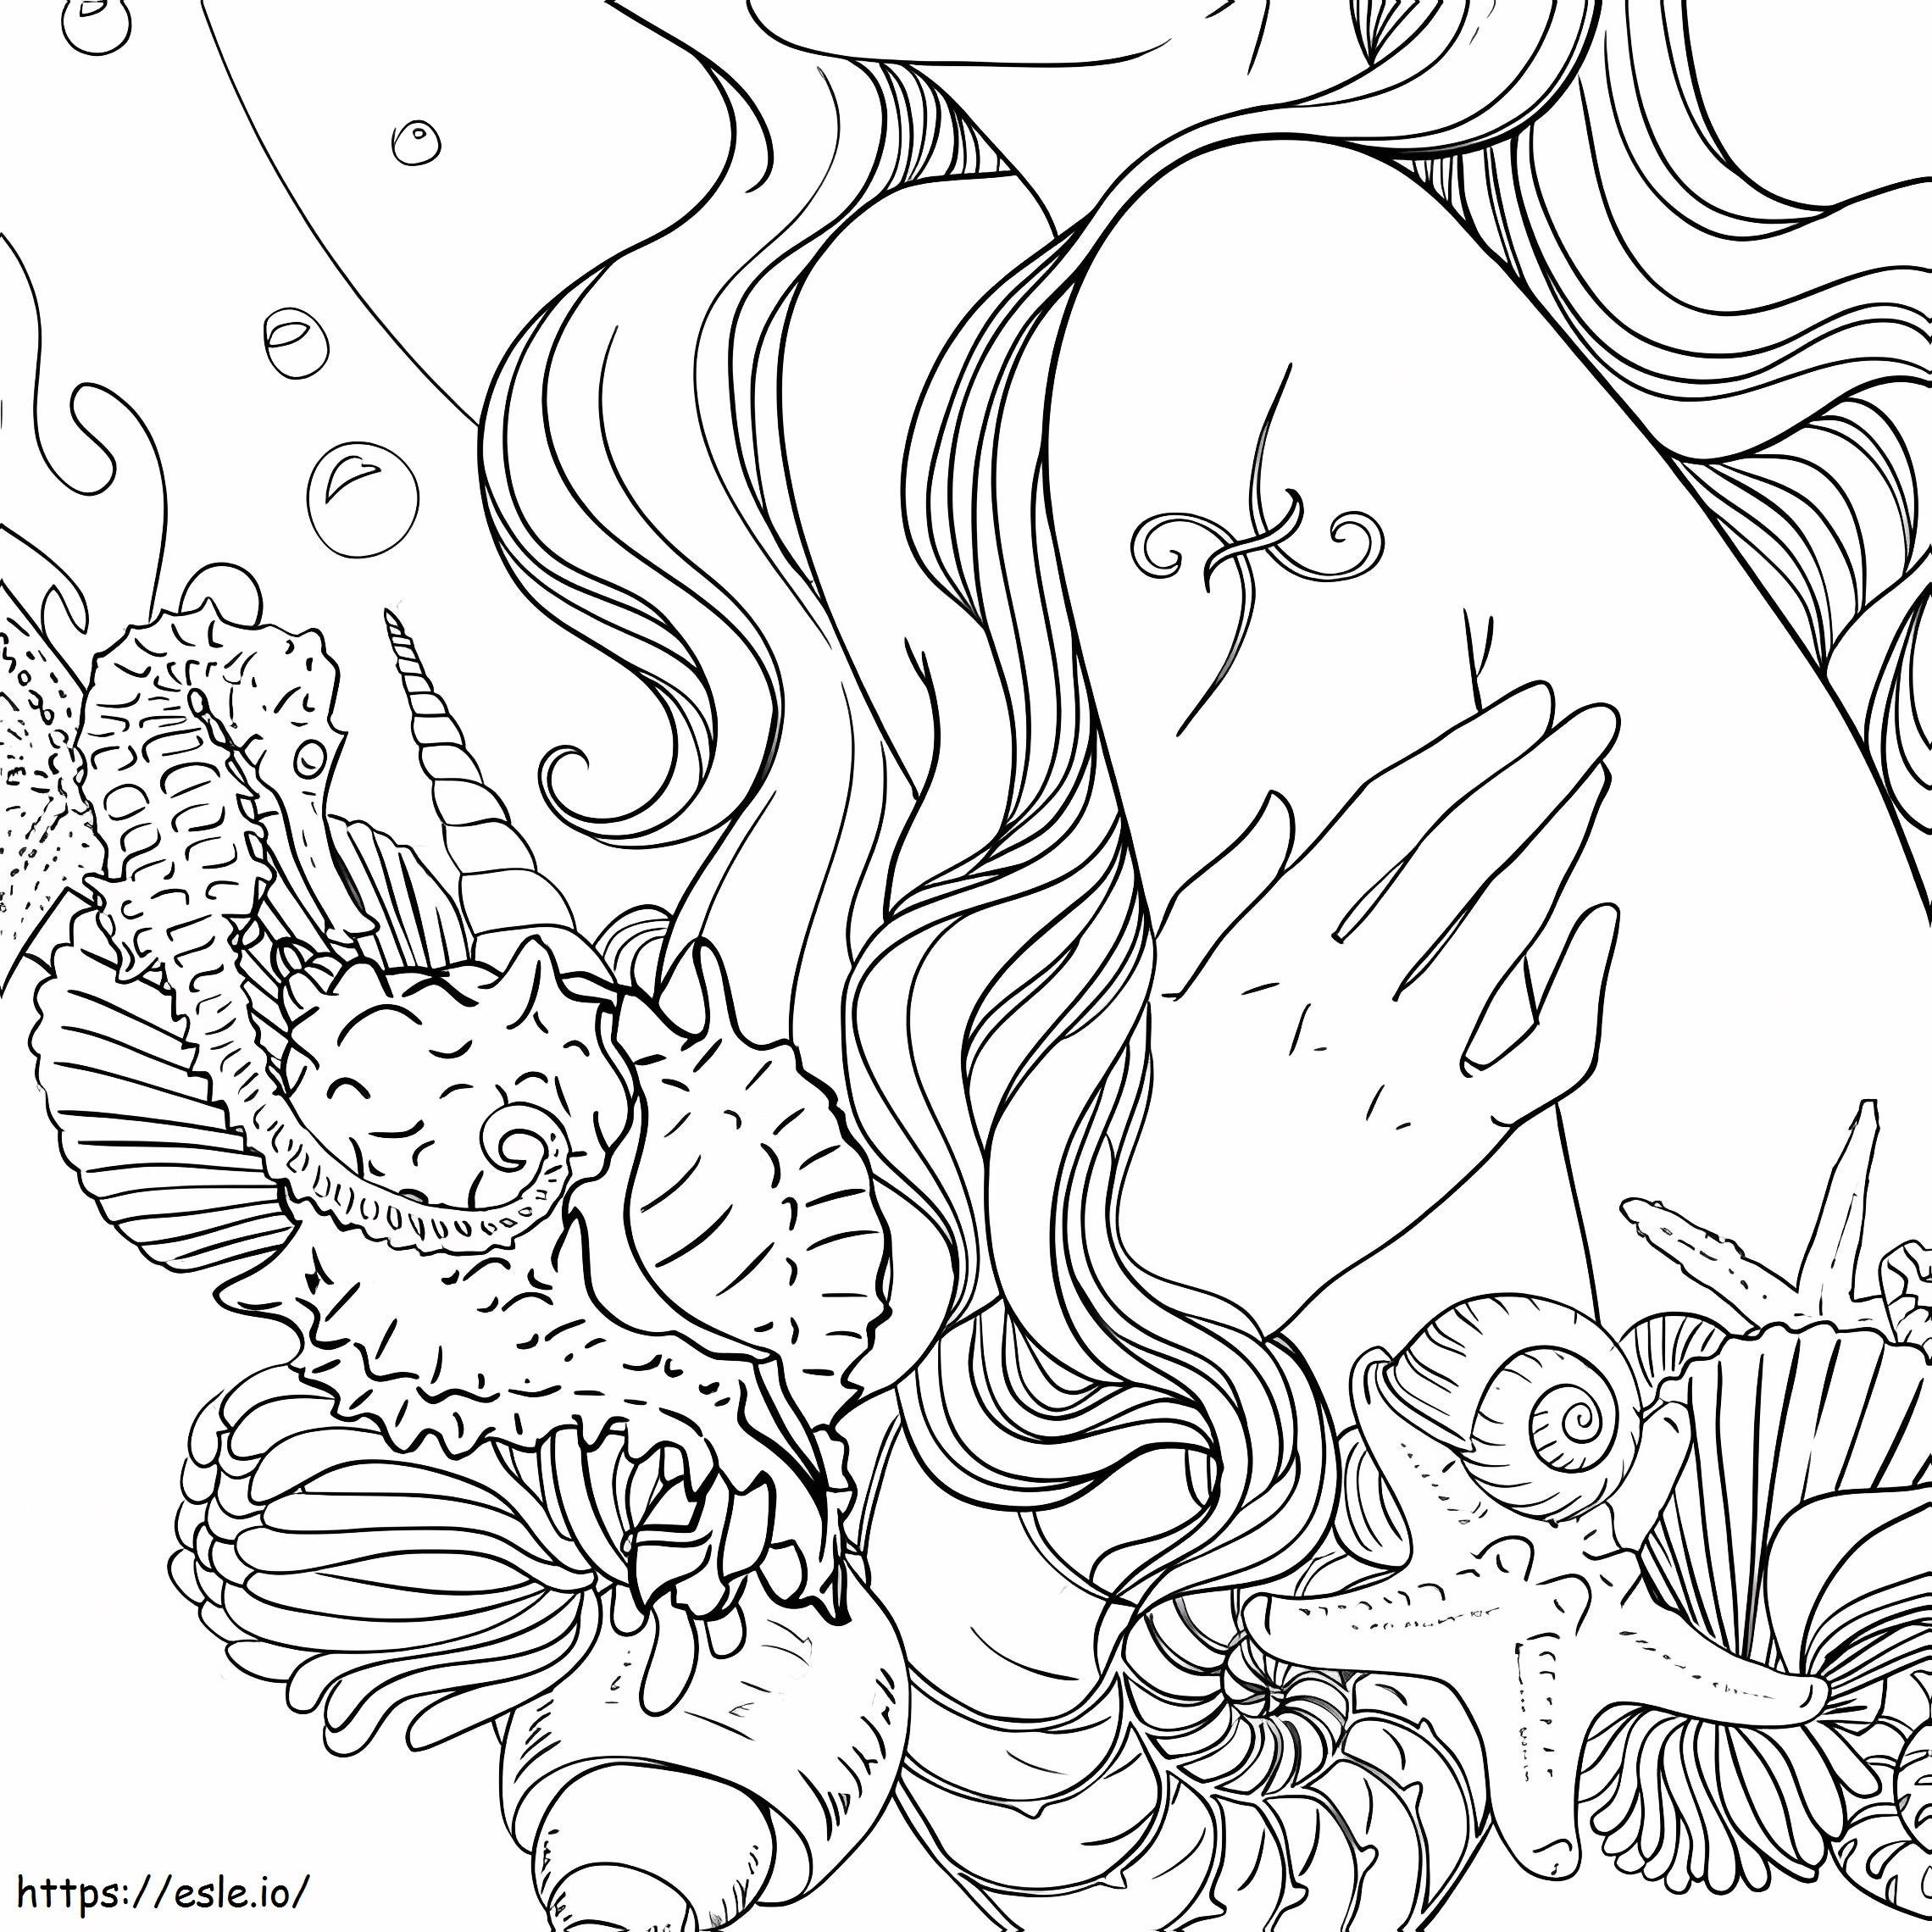 Pisces Tattoo coloring page